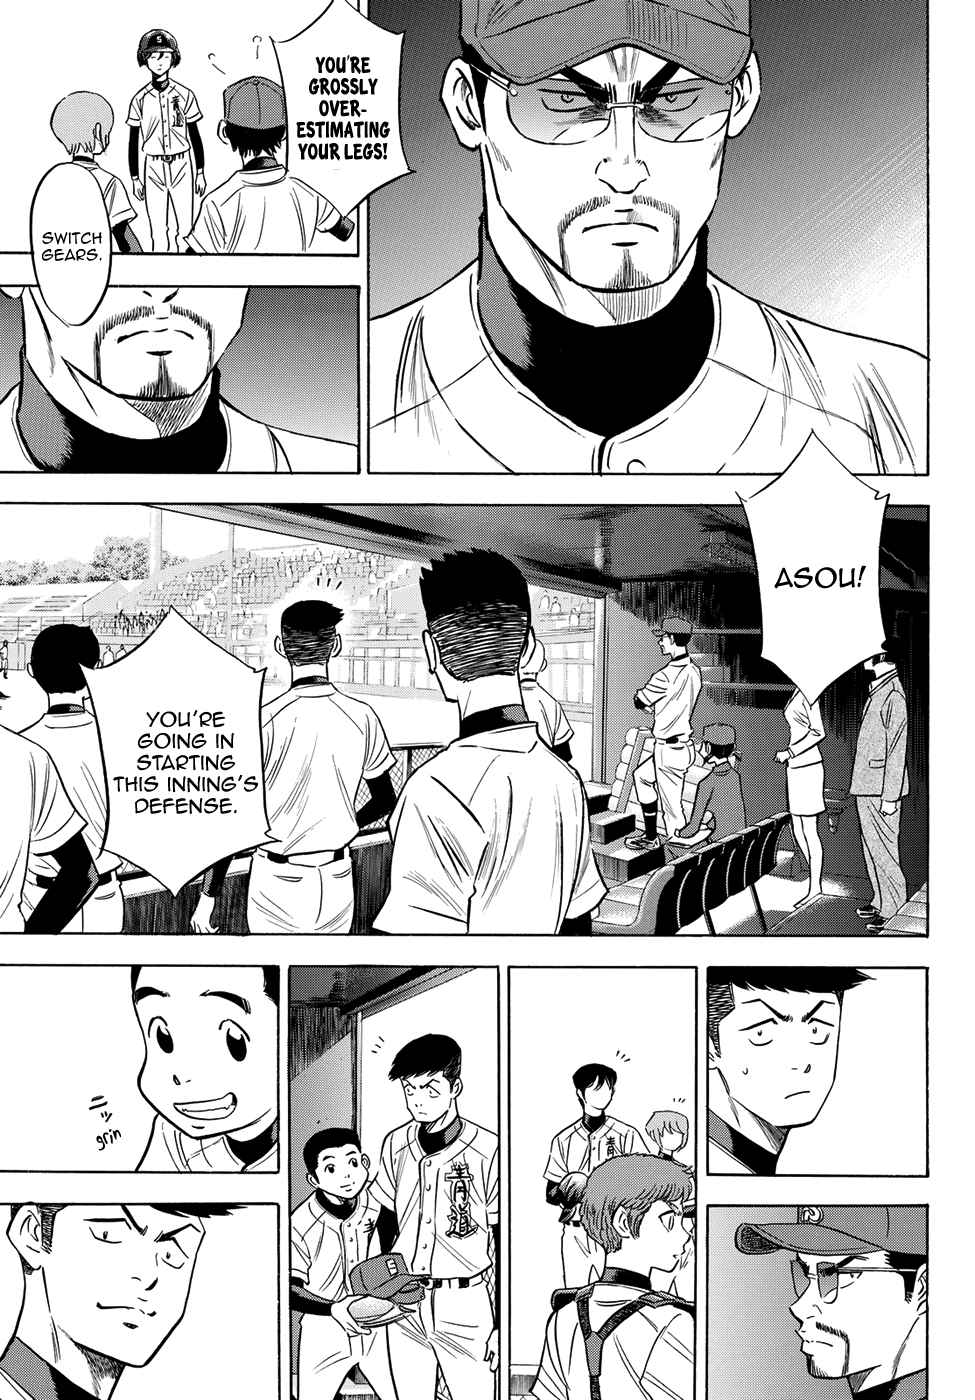 Diamond no Ace Act II Vol. 8 Ch. 71 Fruitlessly